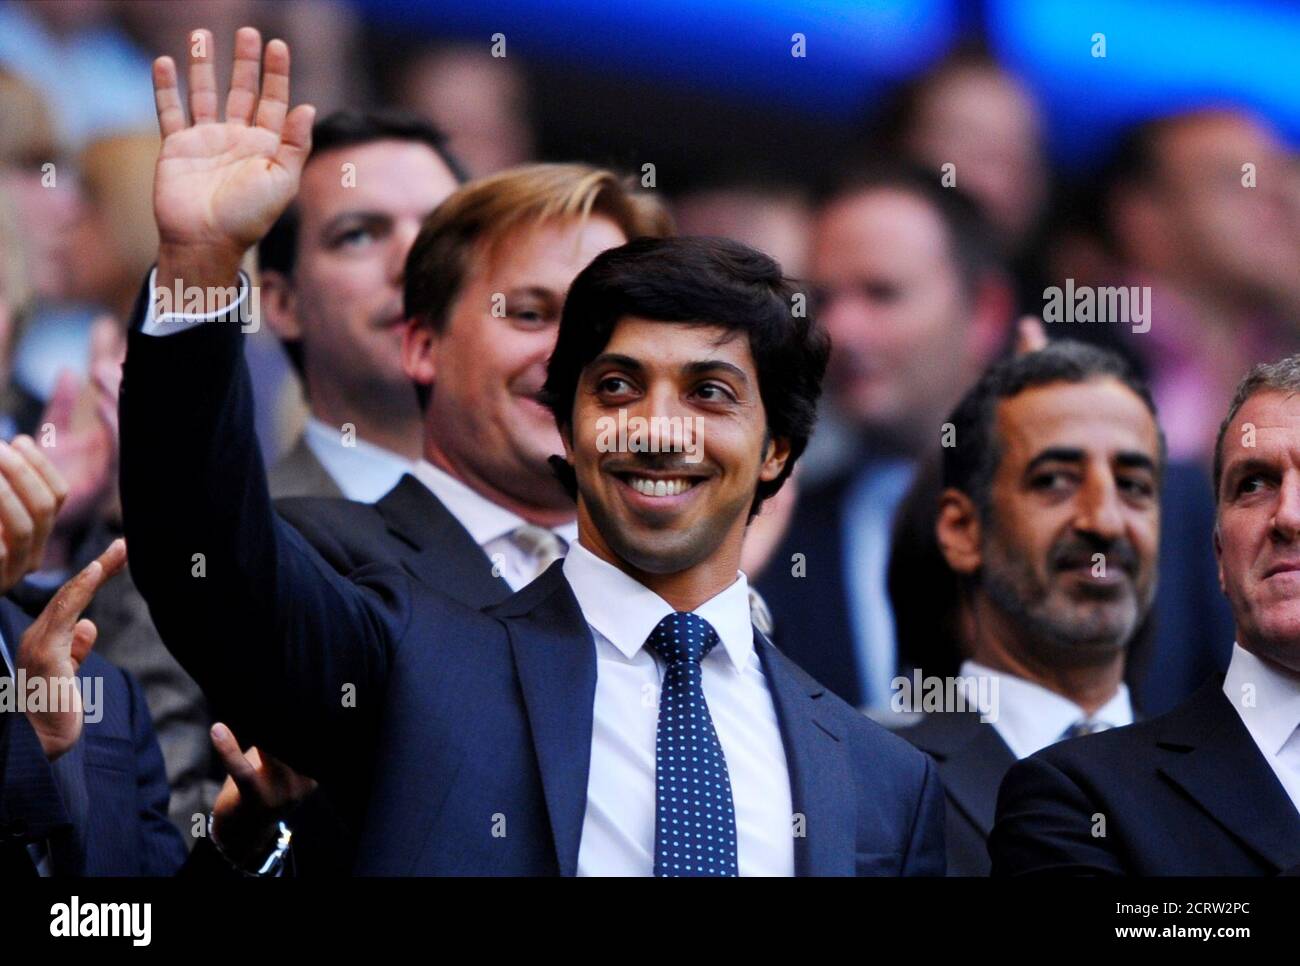 Football Manchester City V Liverpool Barclays Premier League The City Of Manchester Stadium 10 11 23 8 10 Manchester City Owner Sheikh Mansour Bin Zayed Al Nahyan Waves Mandatory